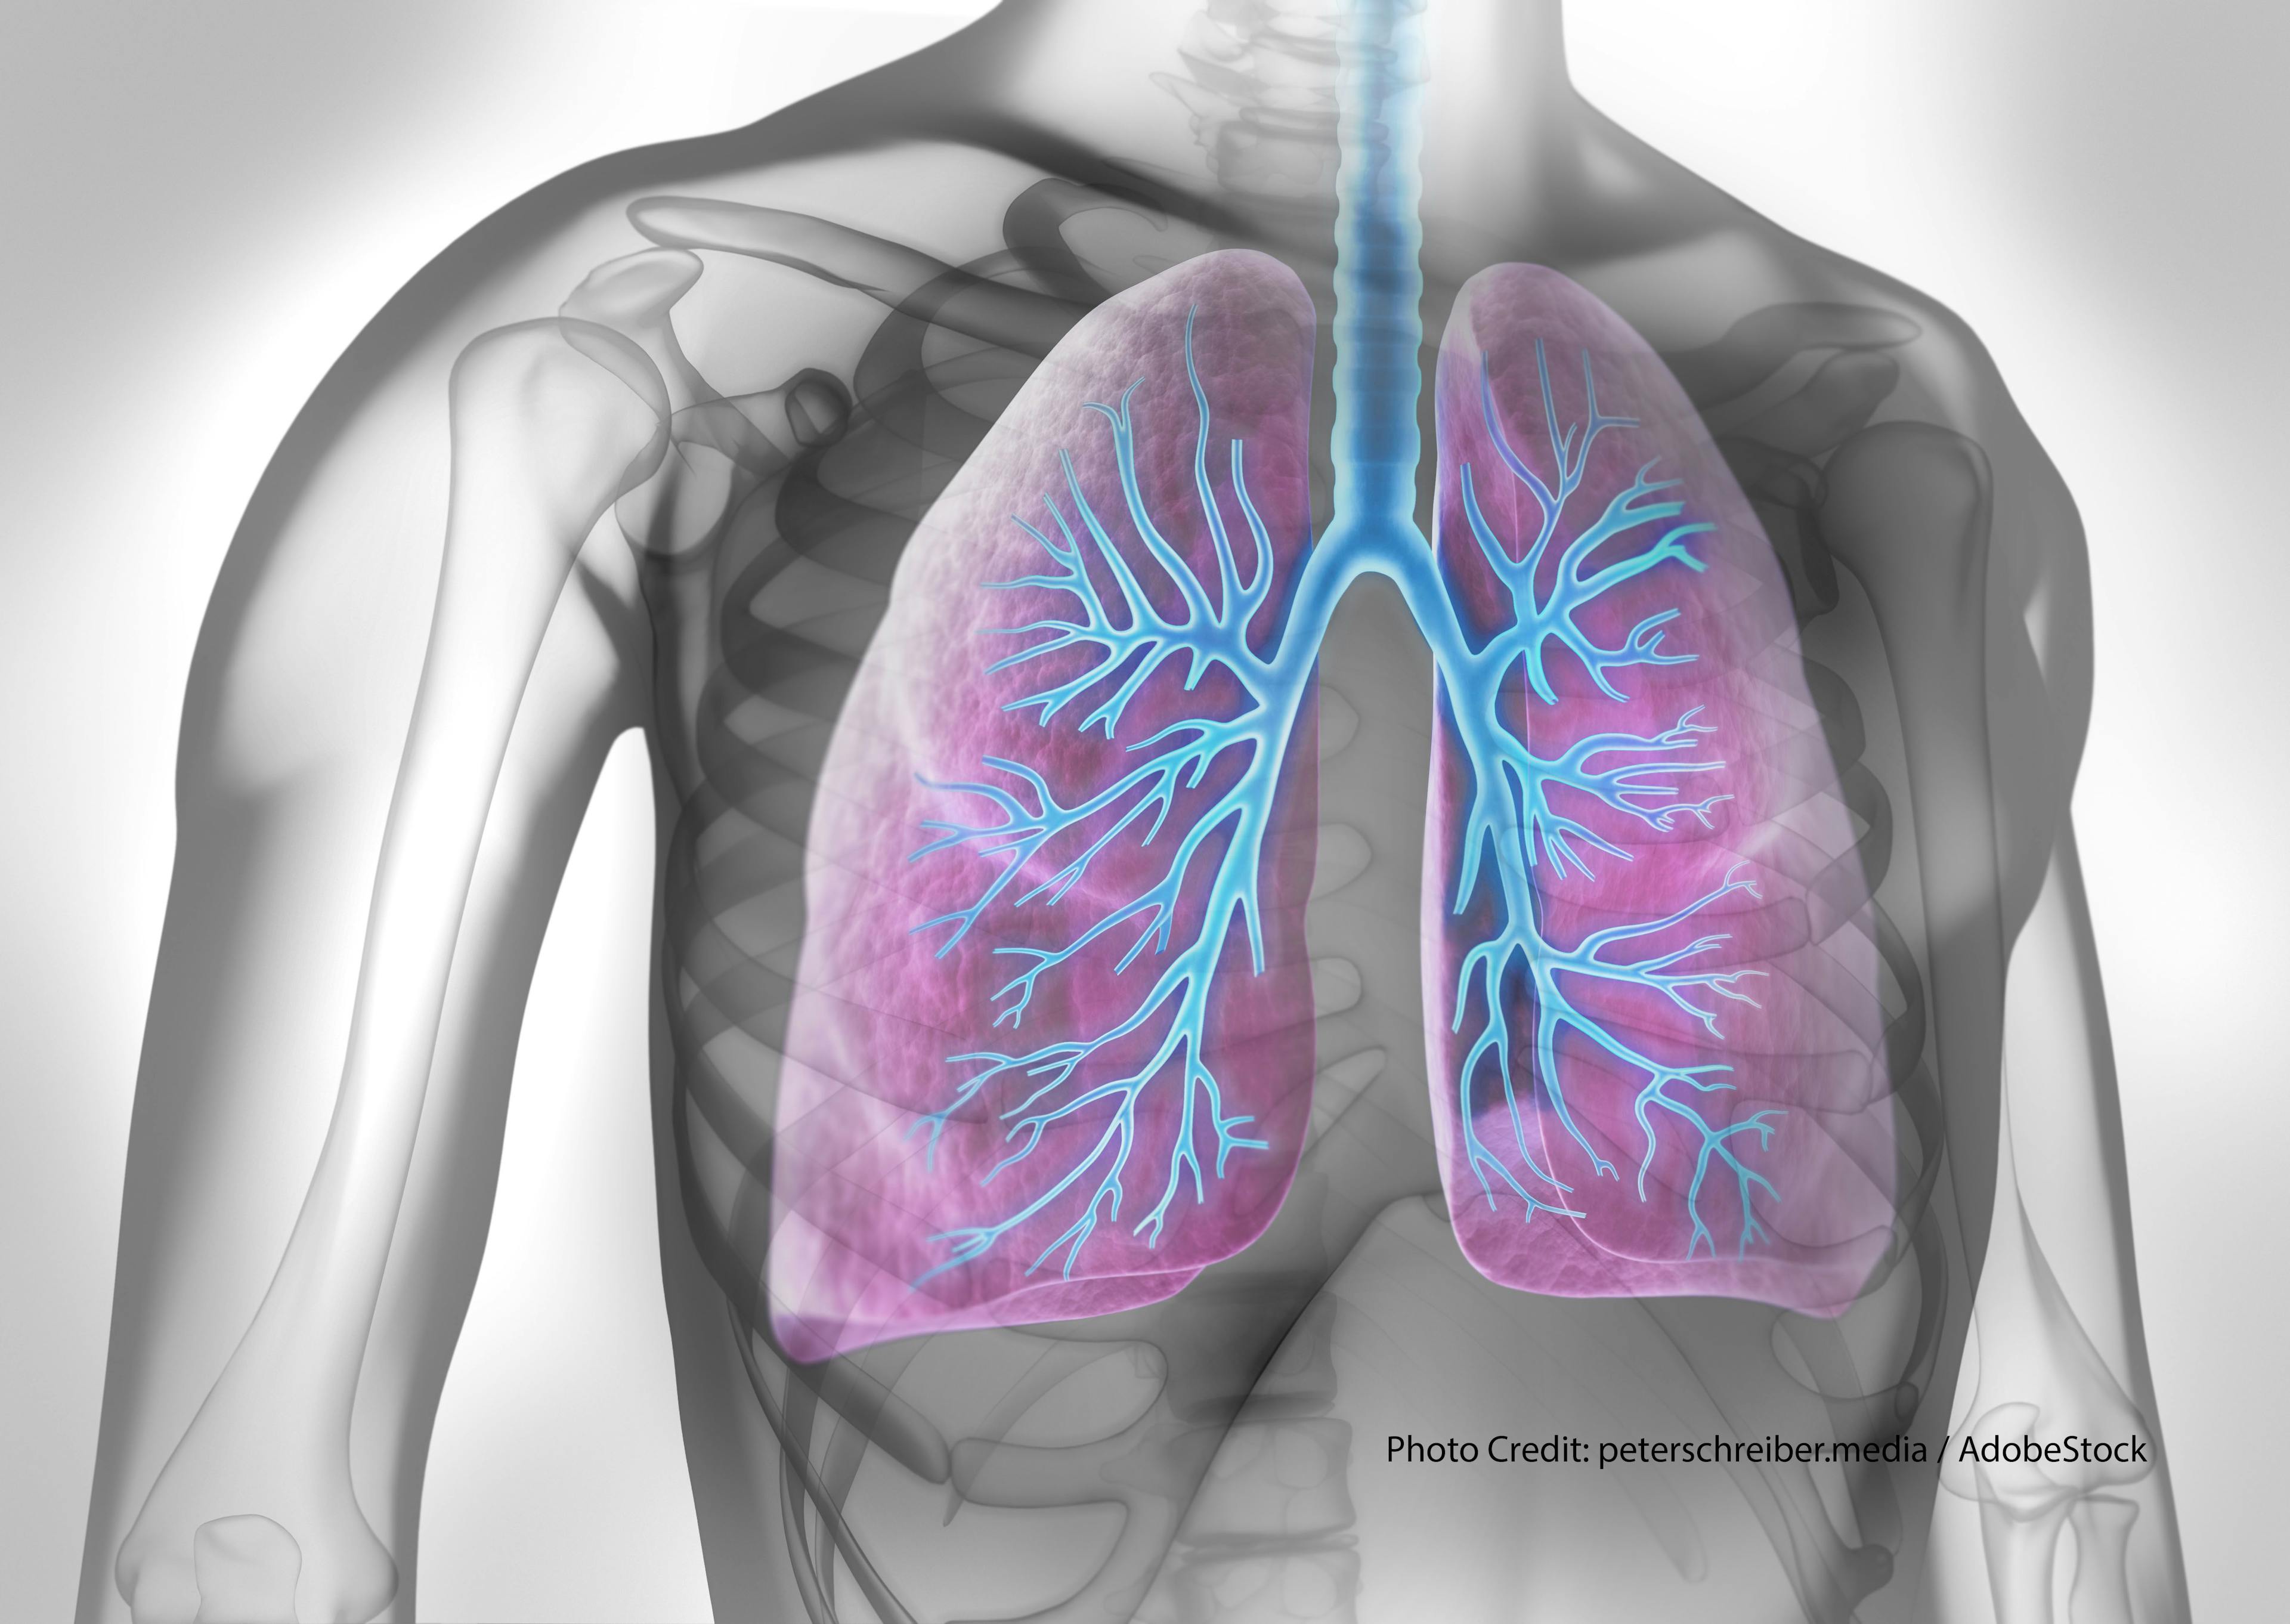 Chemotherapy in NSCLC Patients With COPD: Do Benefits Outweigh the Risks?